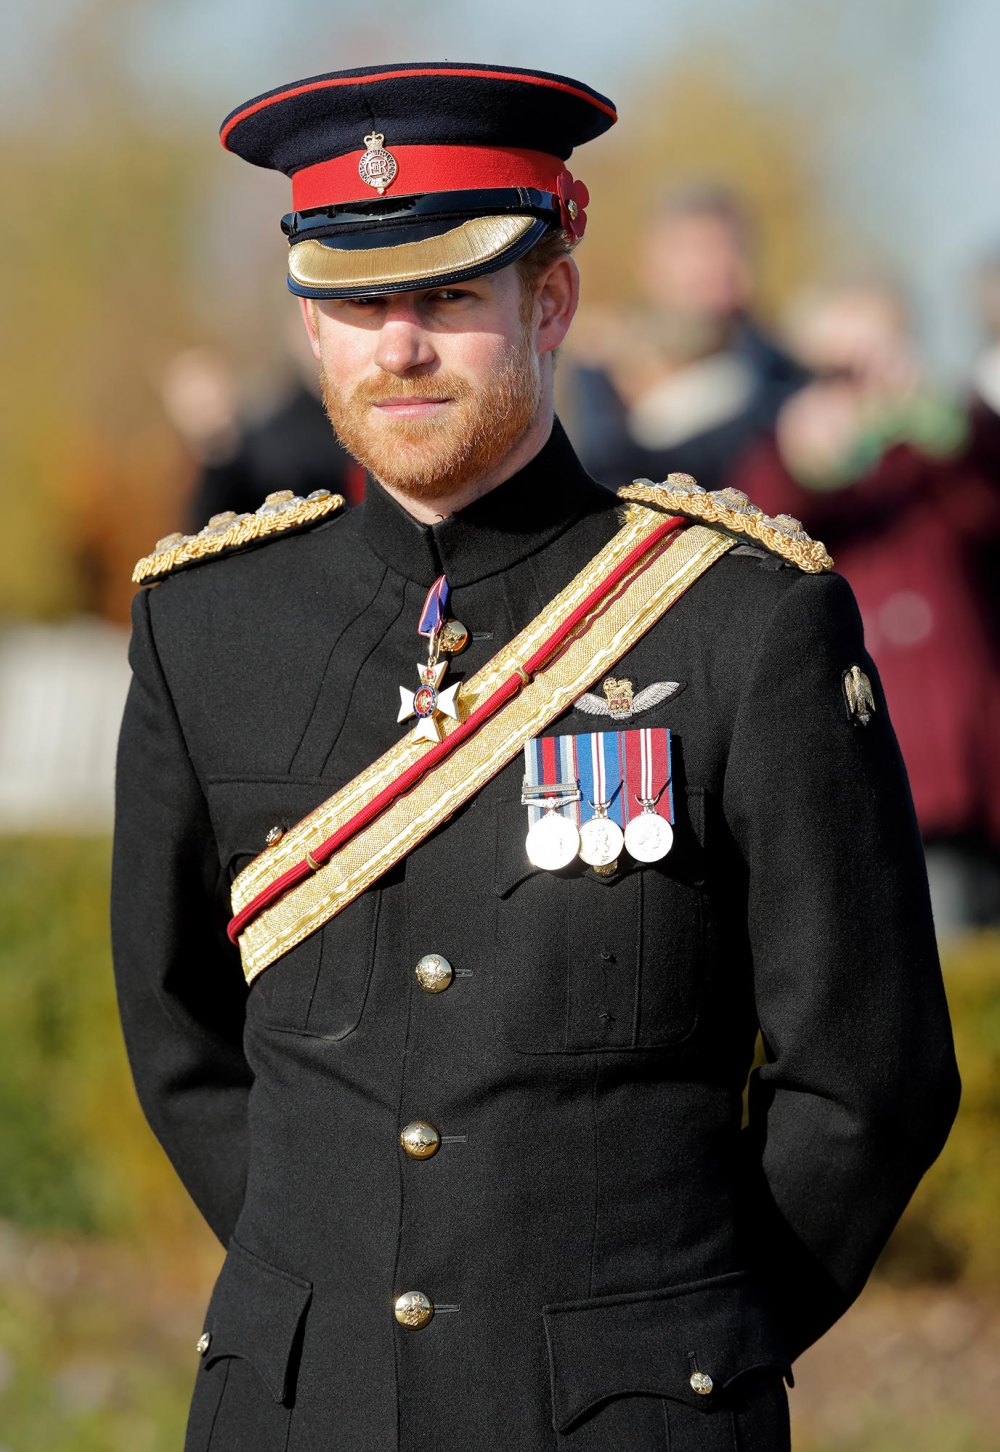 Prince Harry wears military medals during Members of the Year's 2nd Surprise Service appearance